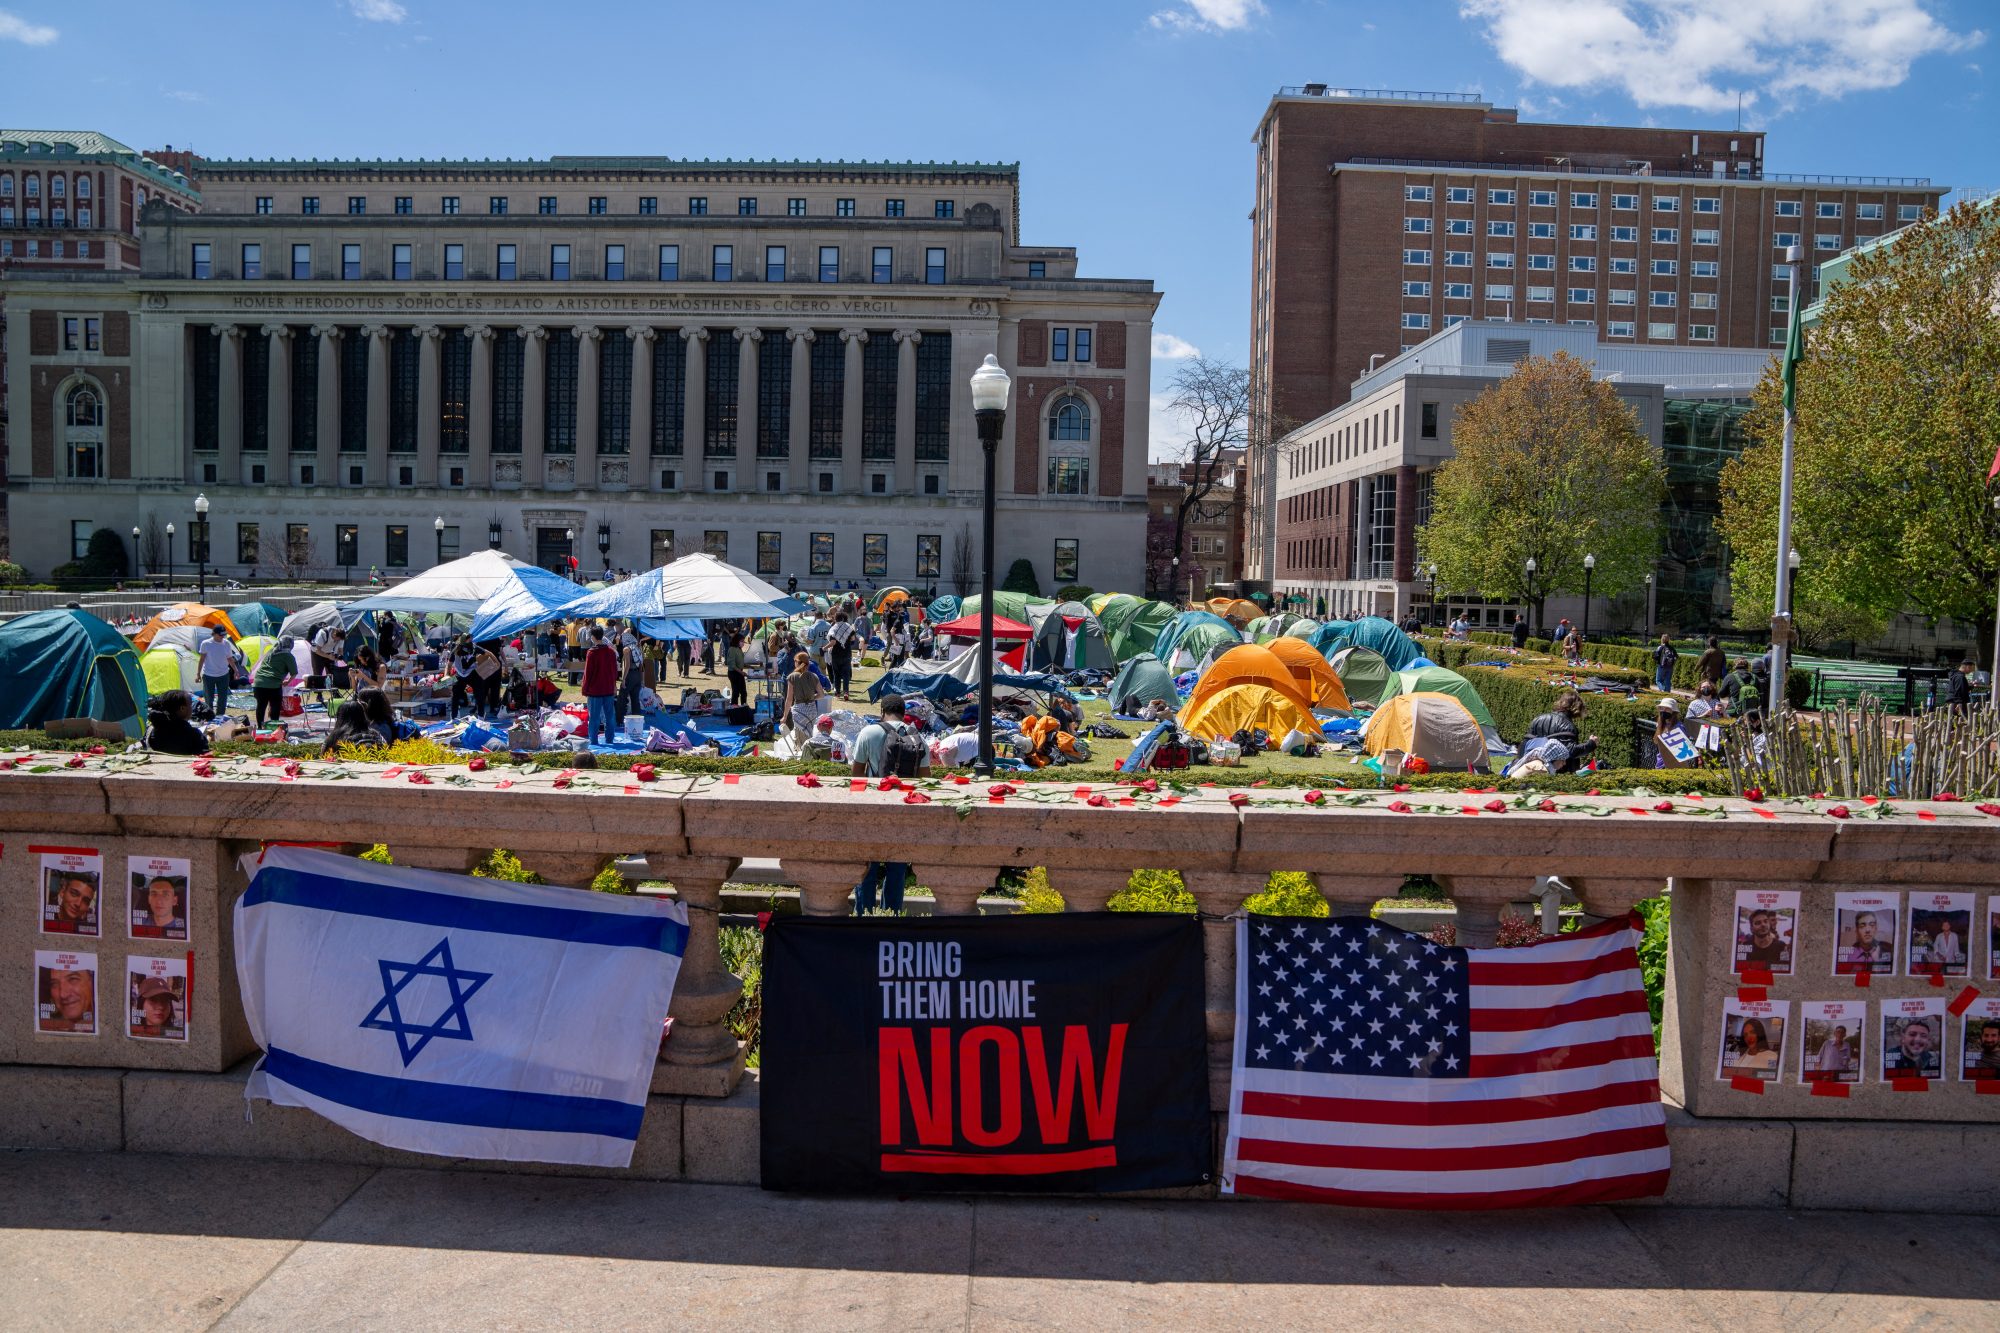 Signs in support of Israel are posted on campus near the encampment where students are protesting in support of Palestinians at Columbia University.